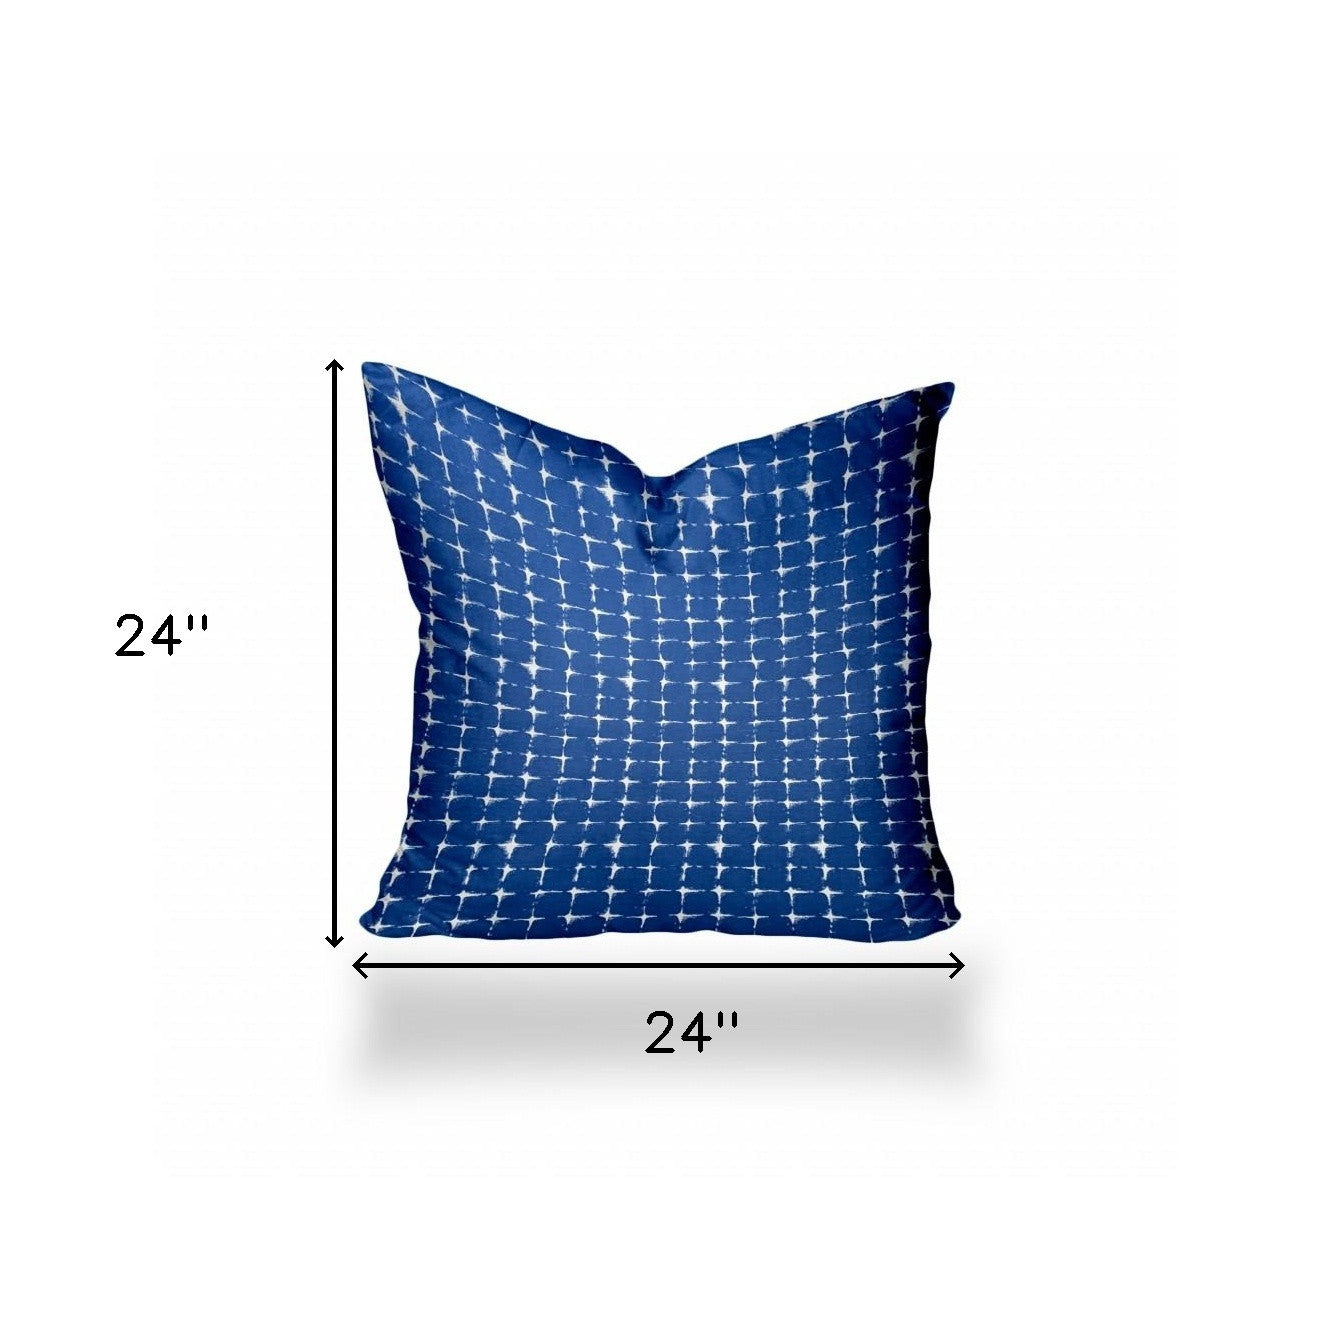 24" X 24" Blue And White Enveloped Gingham Throw Indoor Outdoor Pillow Cover